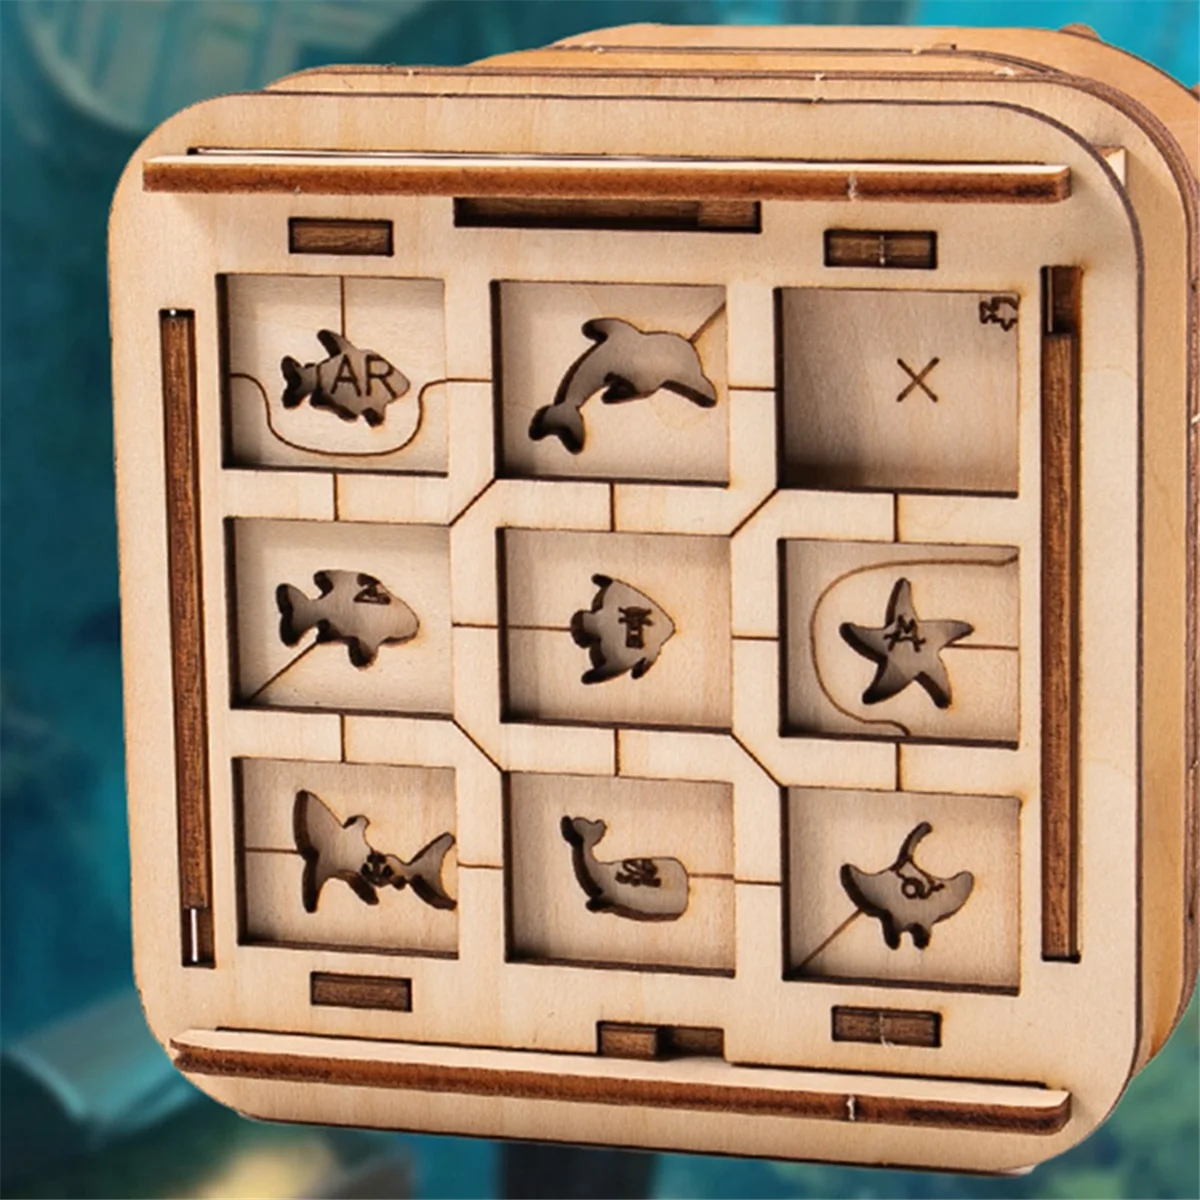 Davy Jones'Locker,Puzzle Box,Gift Box,Wooden Puzzle,Wooden Jigsaw for Adults,Brain Teaser,Birthday Gift Gadget for Men